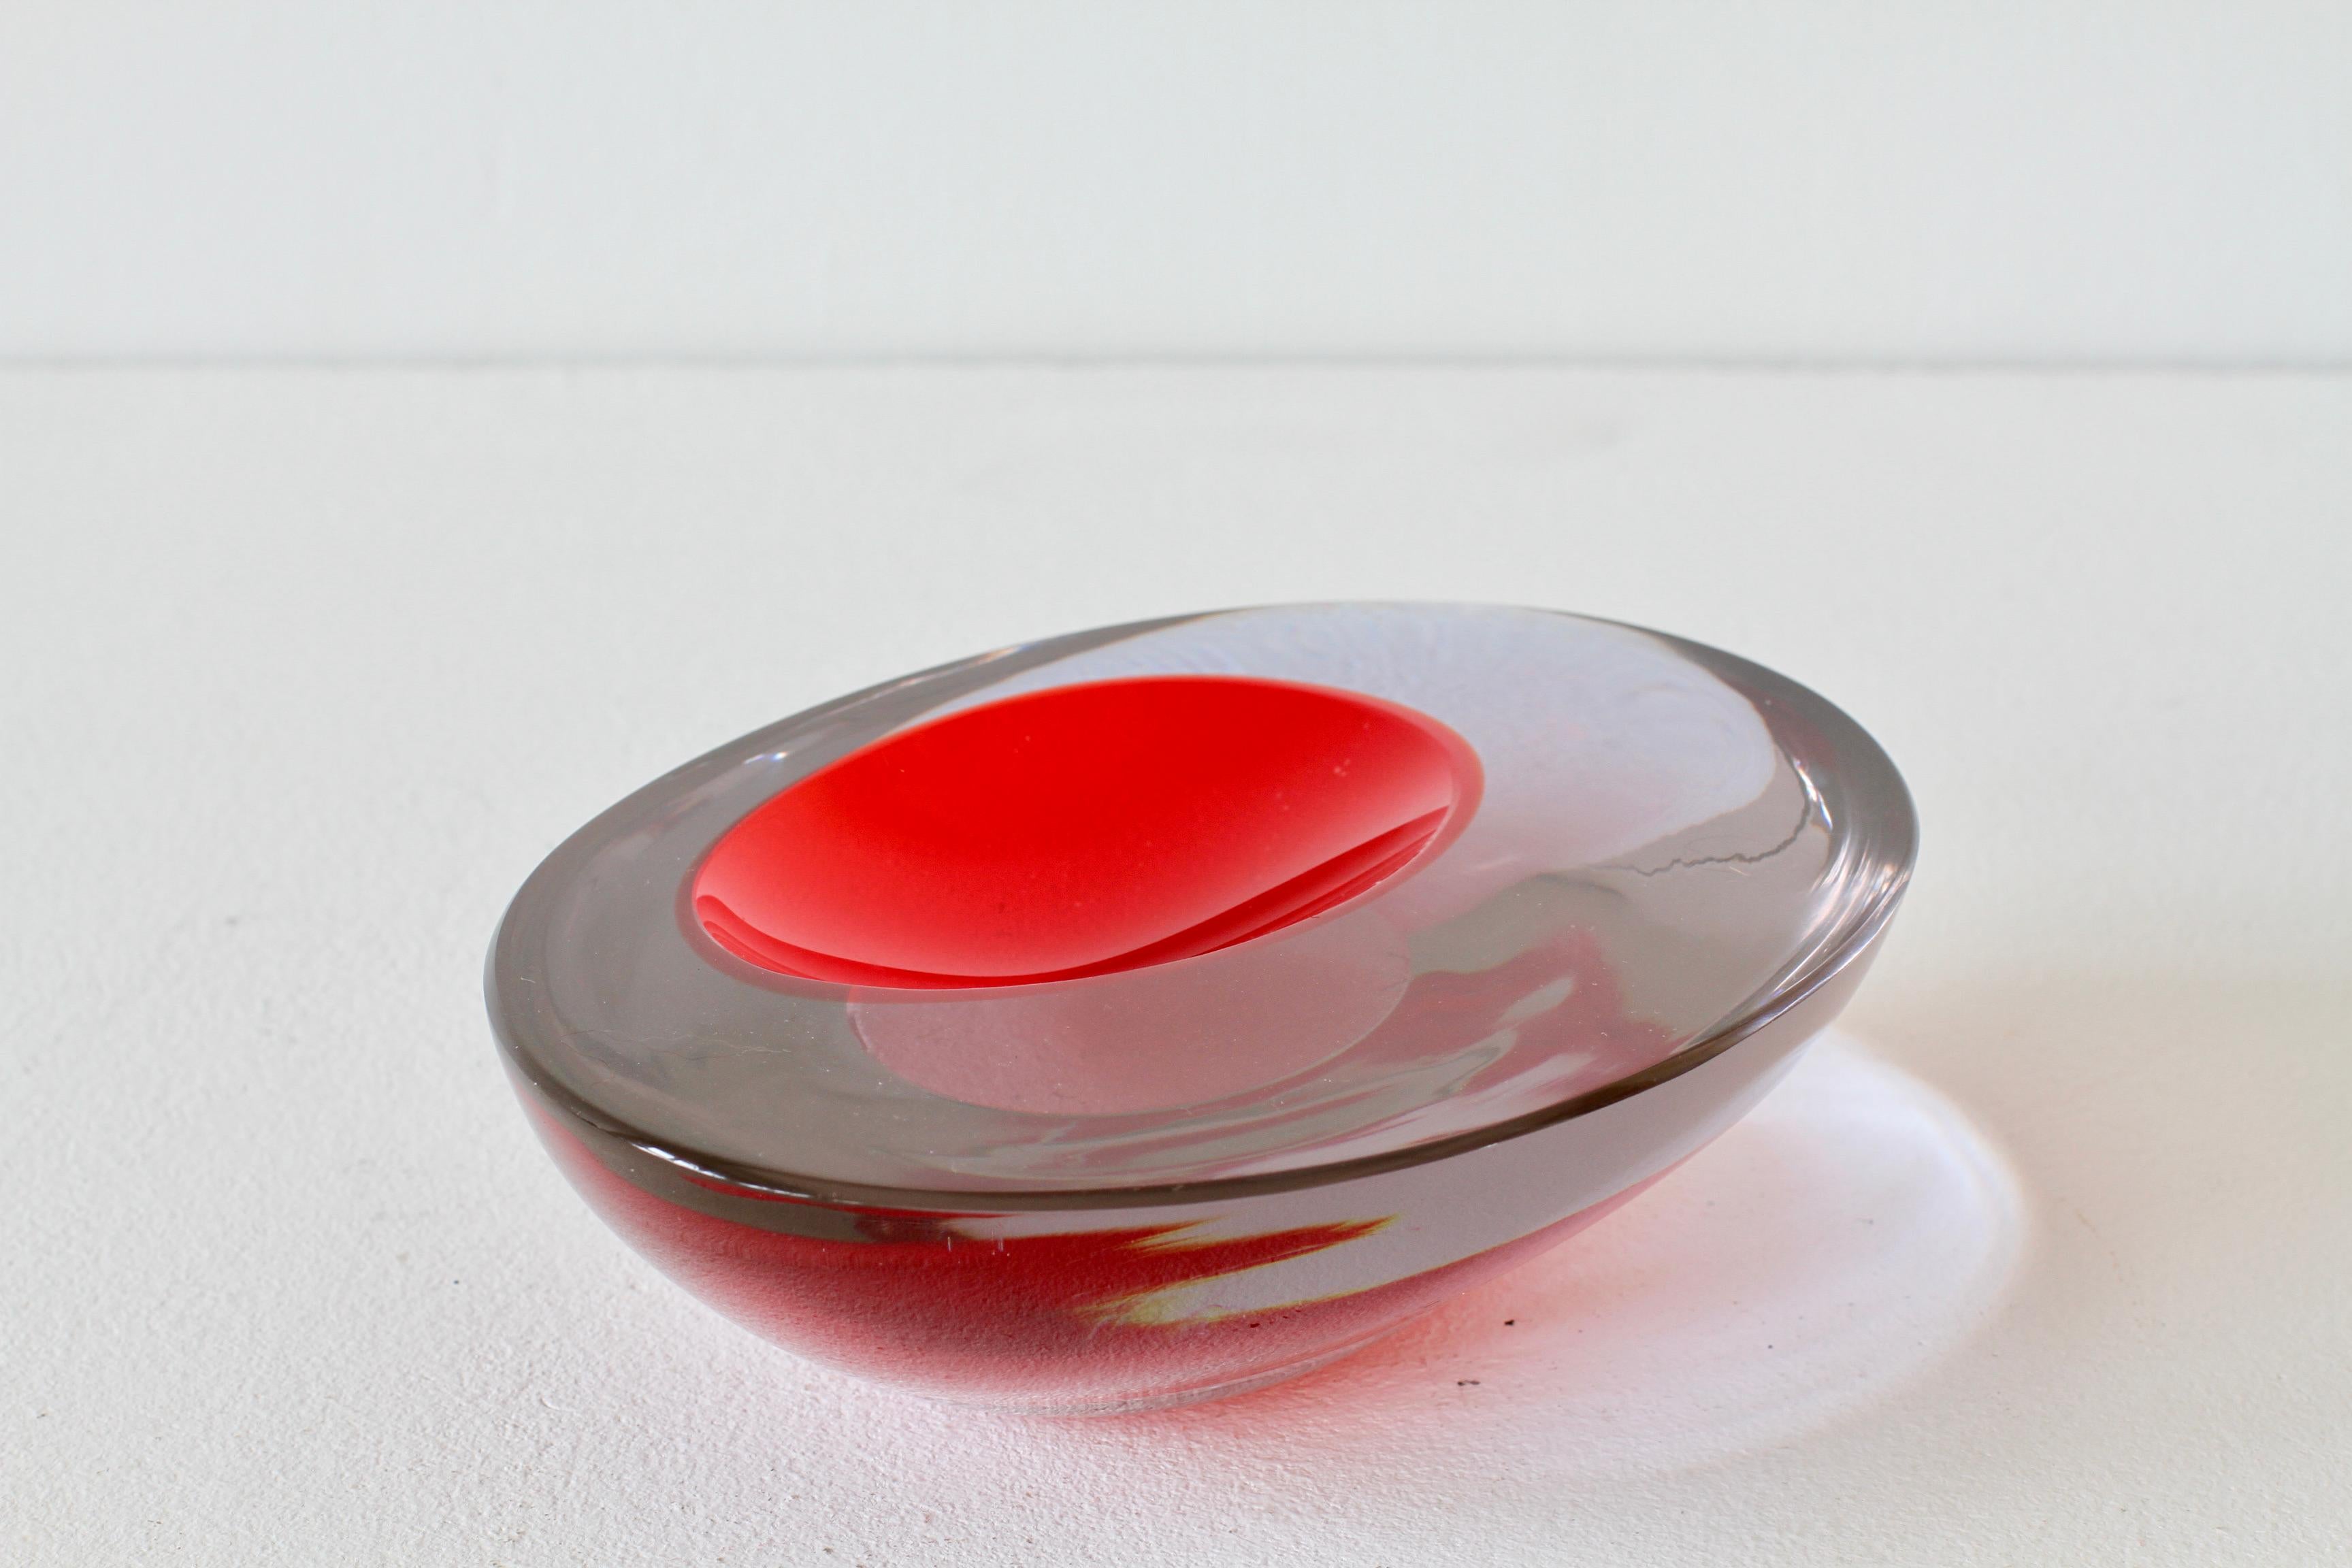 Large Cenedese Italian Asymmetric Red Sommerso Murano Glass Bowl Dish or Ashtray For Sale 6